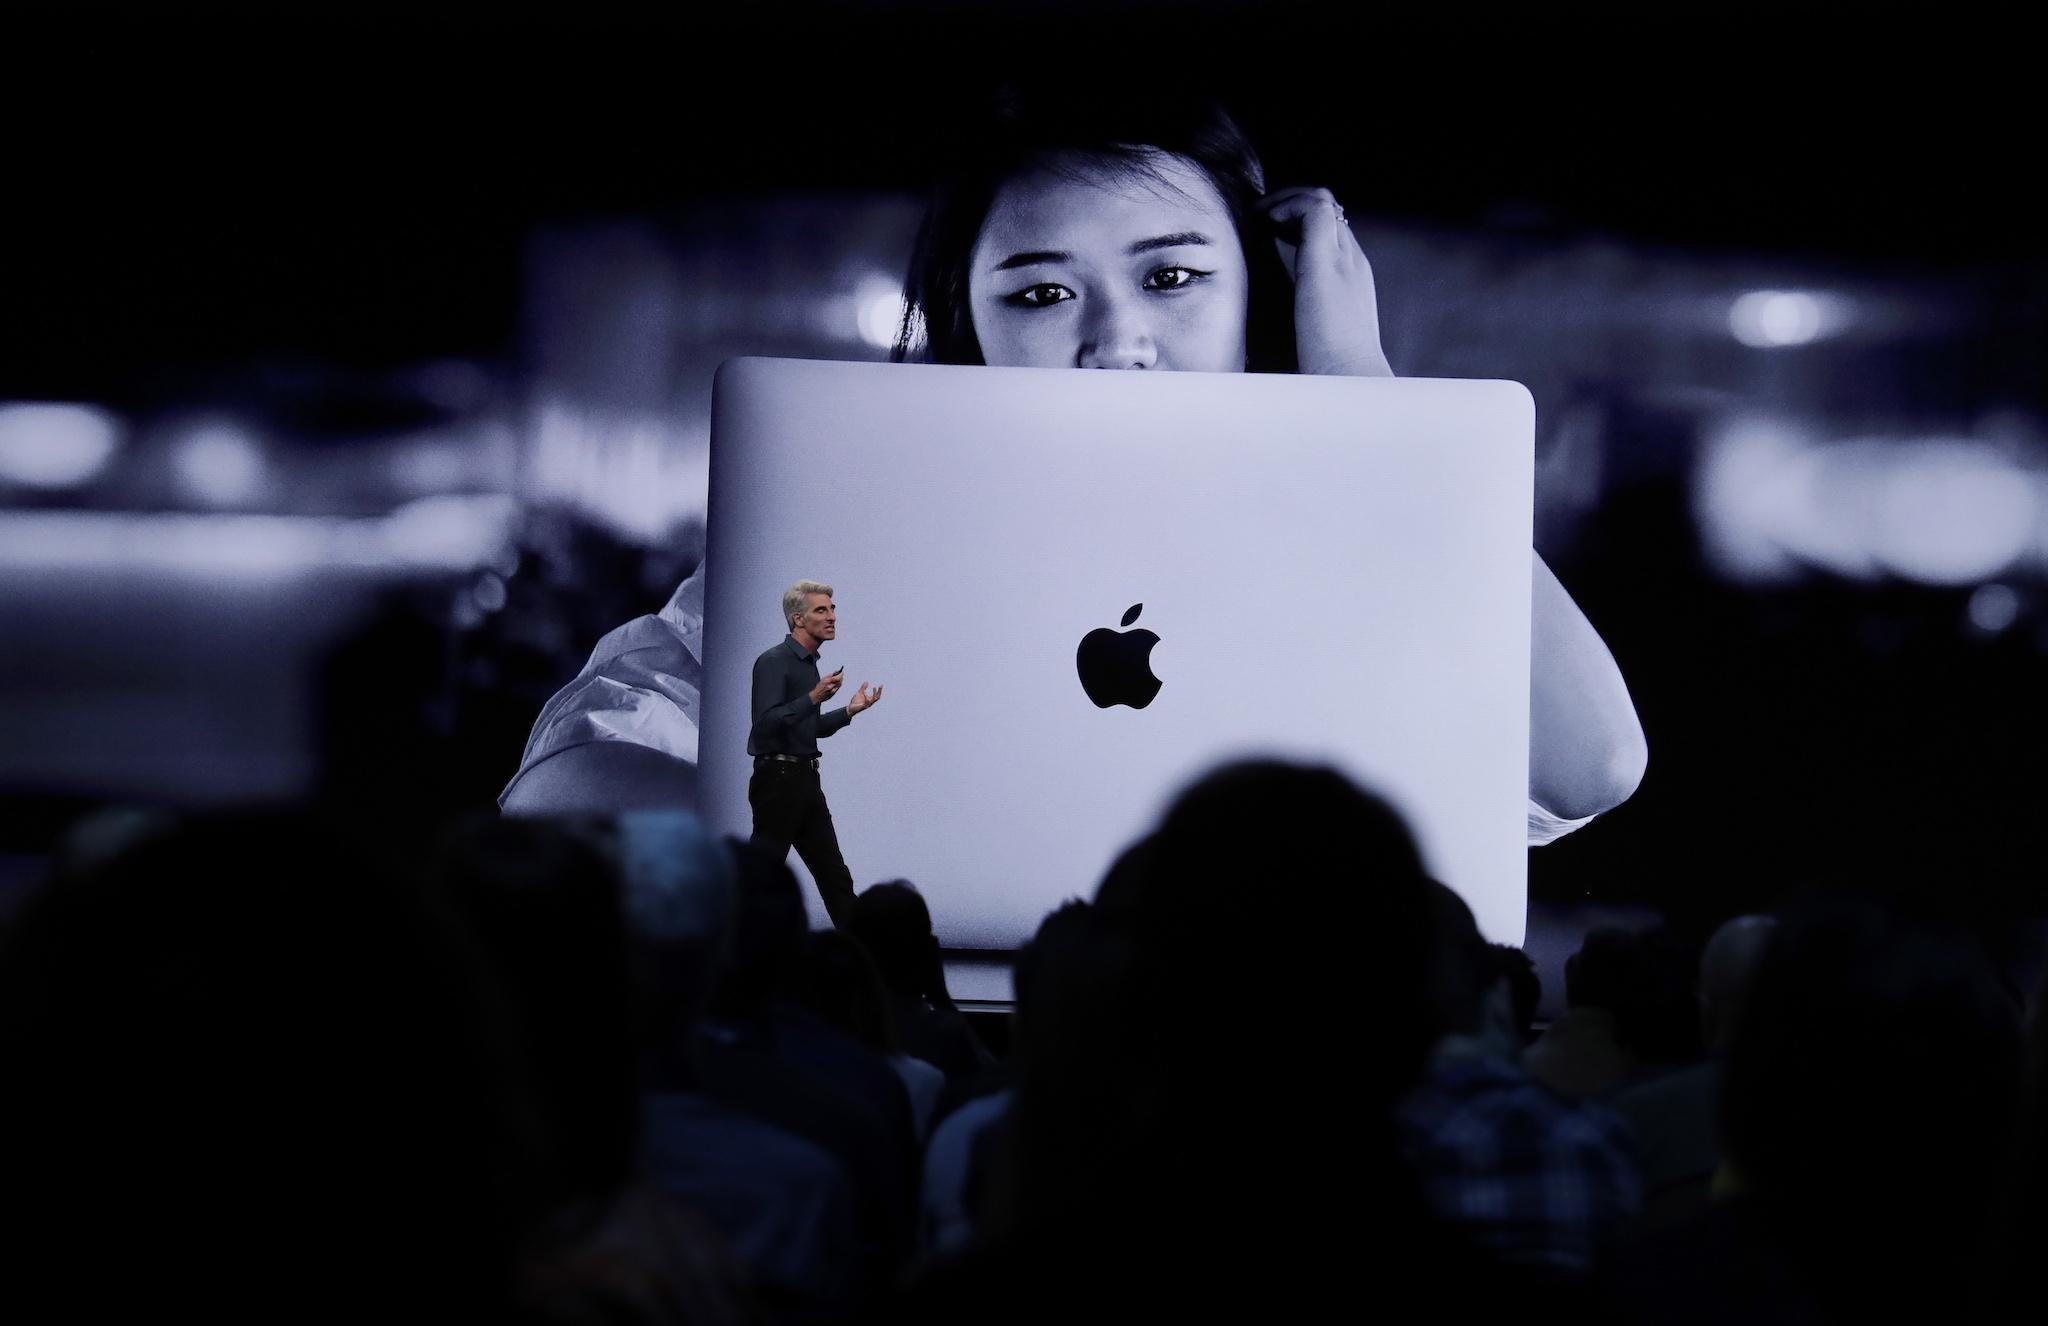 Craig Federighi , Senior Vice President of Software Engineering at Apple, speaks about programming during the keynote address at the Apple World Wide Developers Conference